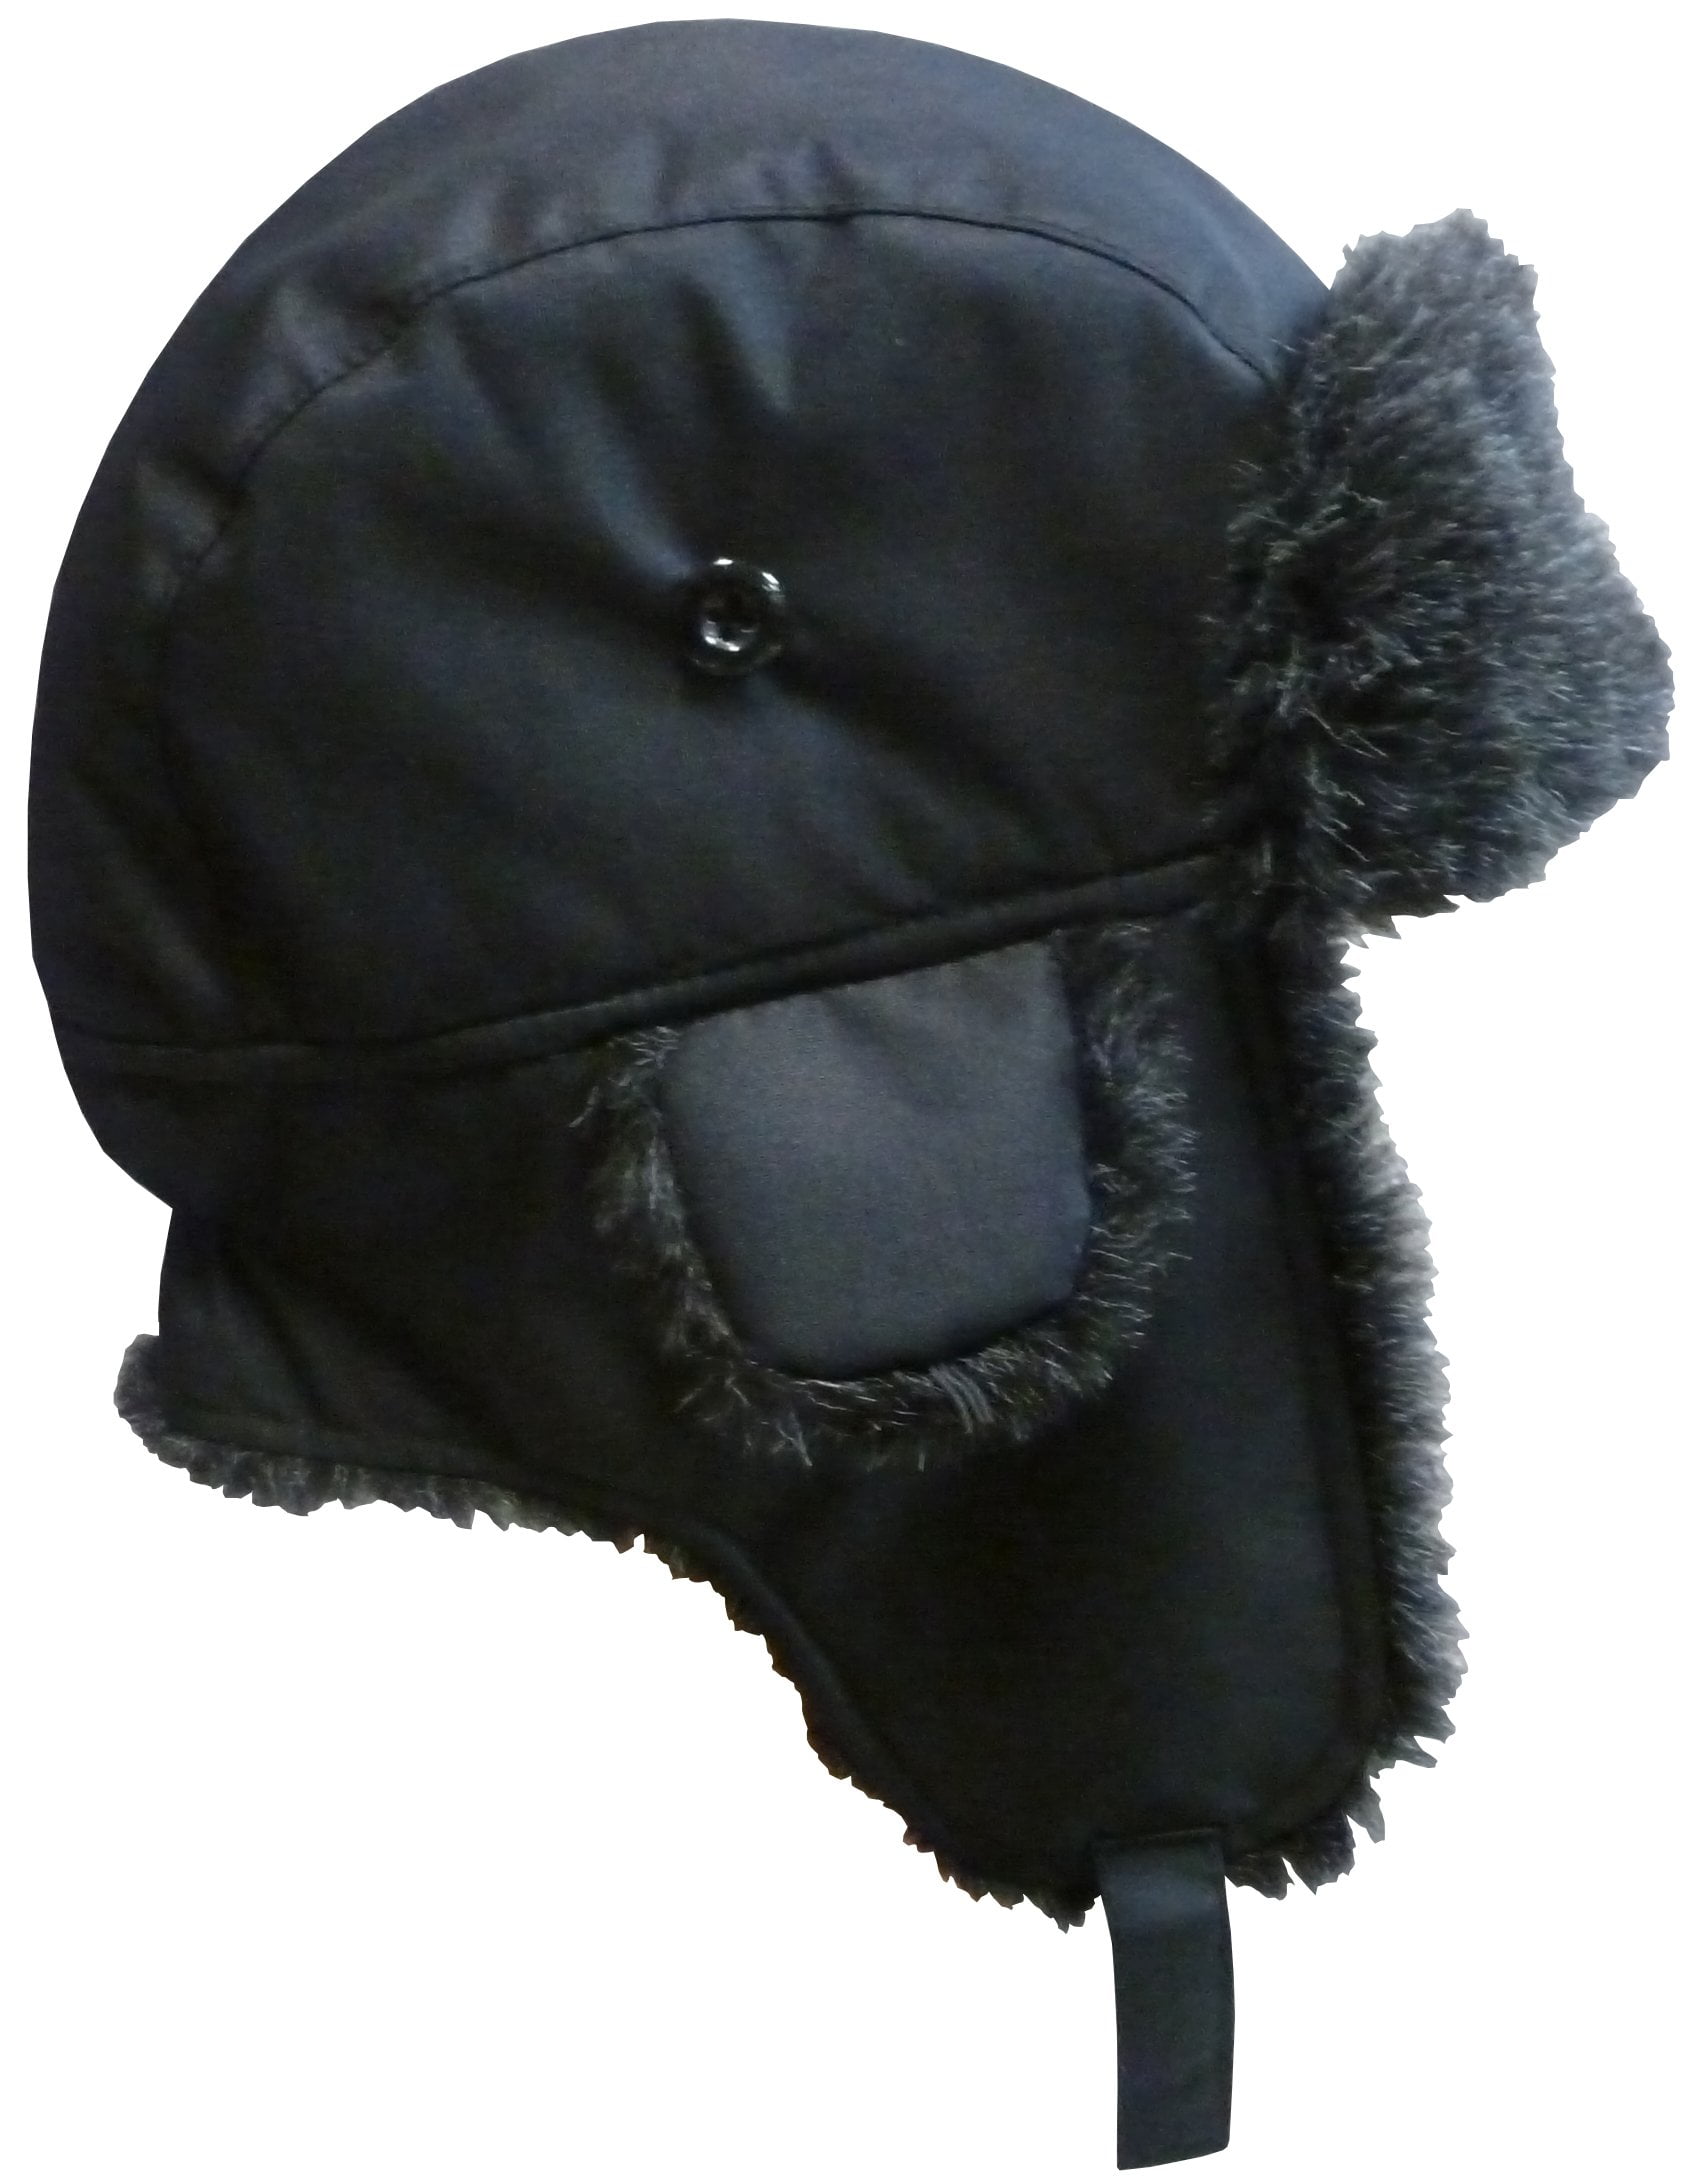 With Ear Flaps Windproof Kid's Earflaps Cap Outdoor Warm Soft Trapper Hat J 